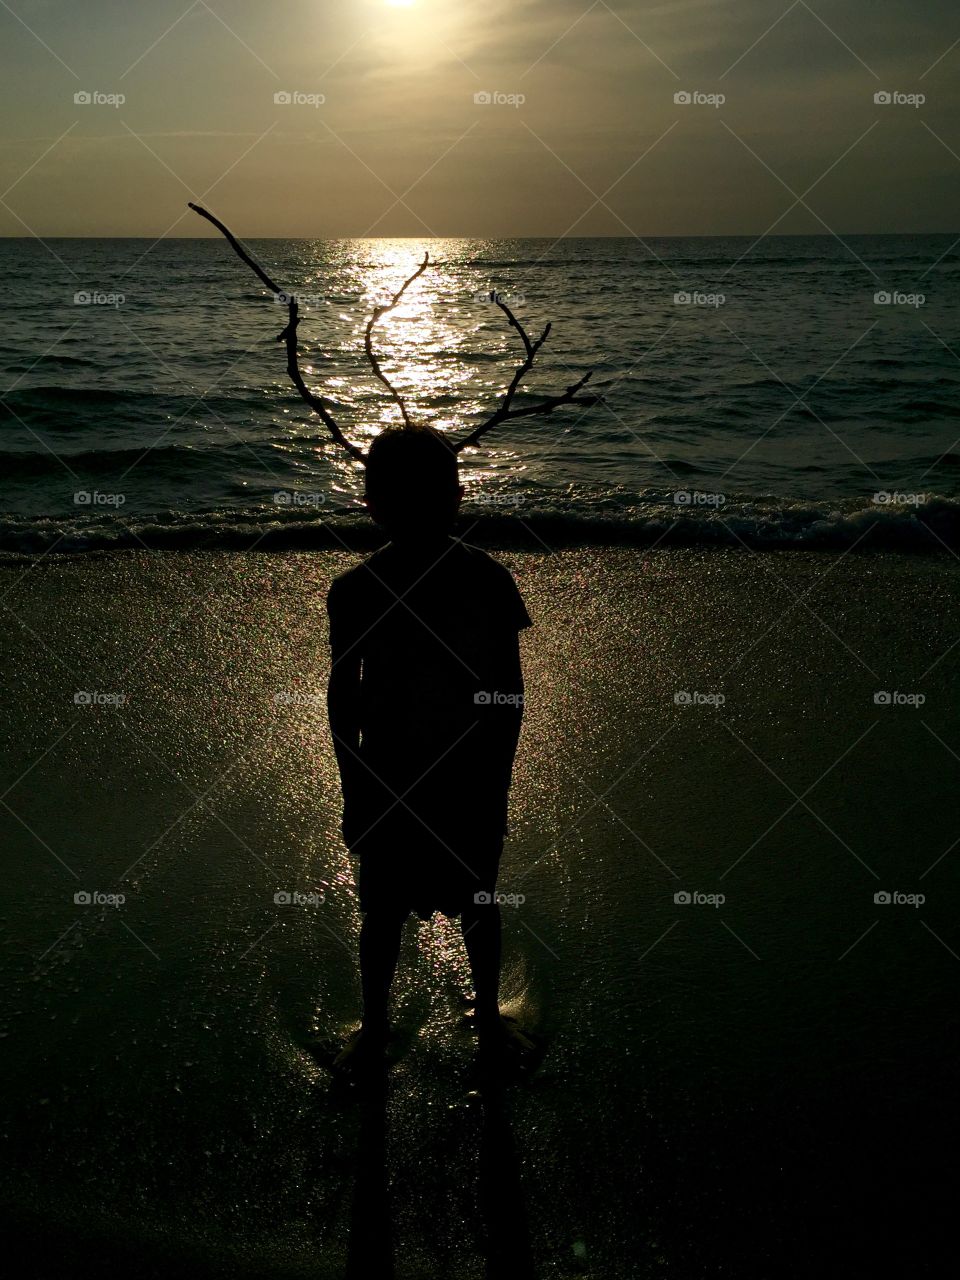 This was captured early sunrise at Oceanridge as a child played with branch that washed ashore and by using his own imagination.